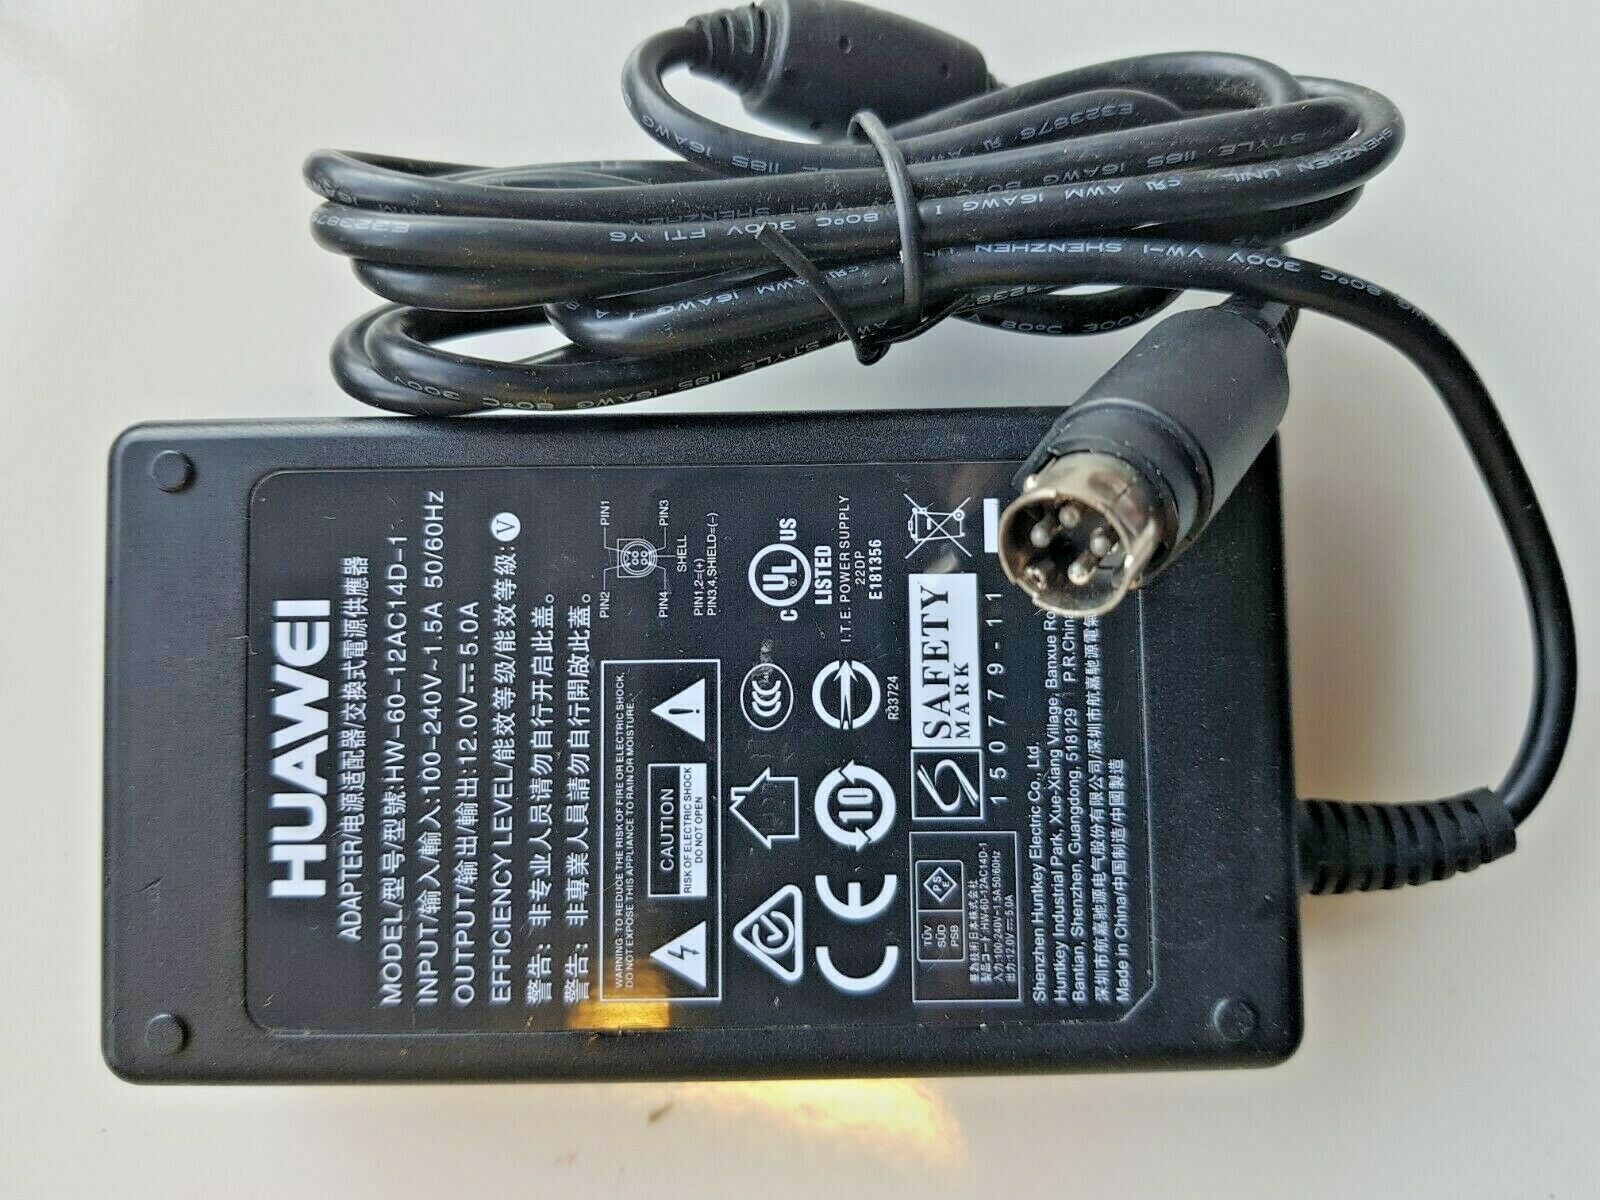 *Brand NEW* HUAWEI HW-60-12AC14D-1 12V 5A 4 PIN DIN 4 ROUTER ADAPTER POWER SUPPLY